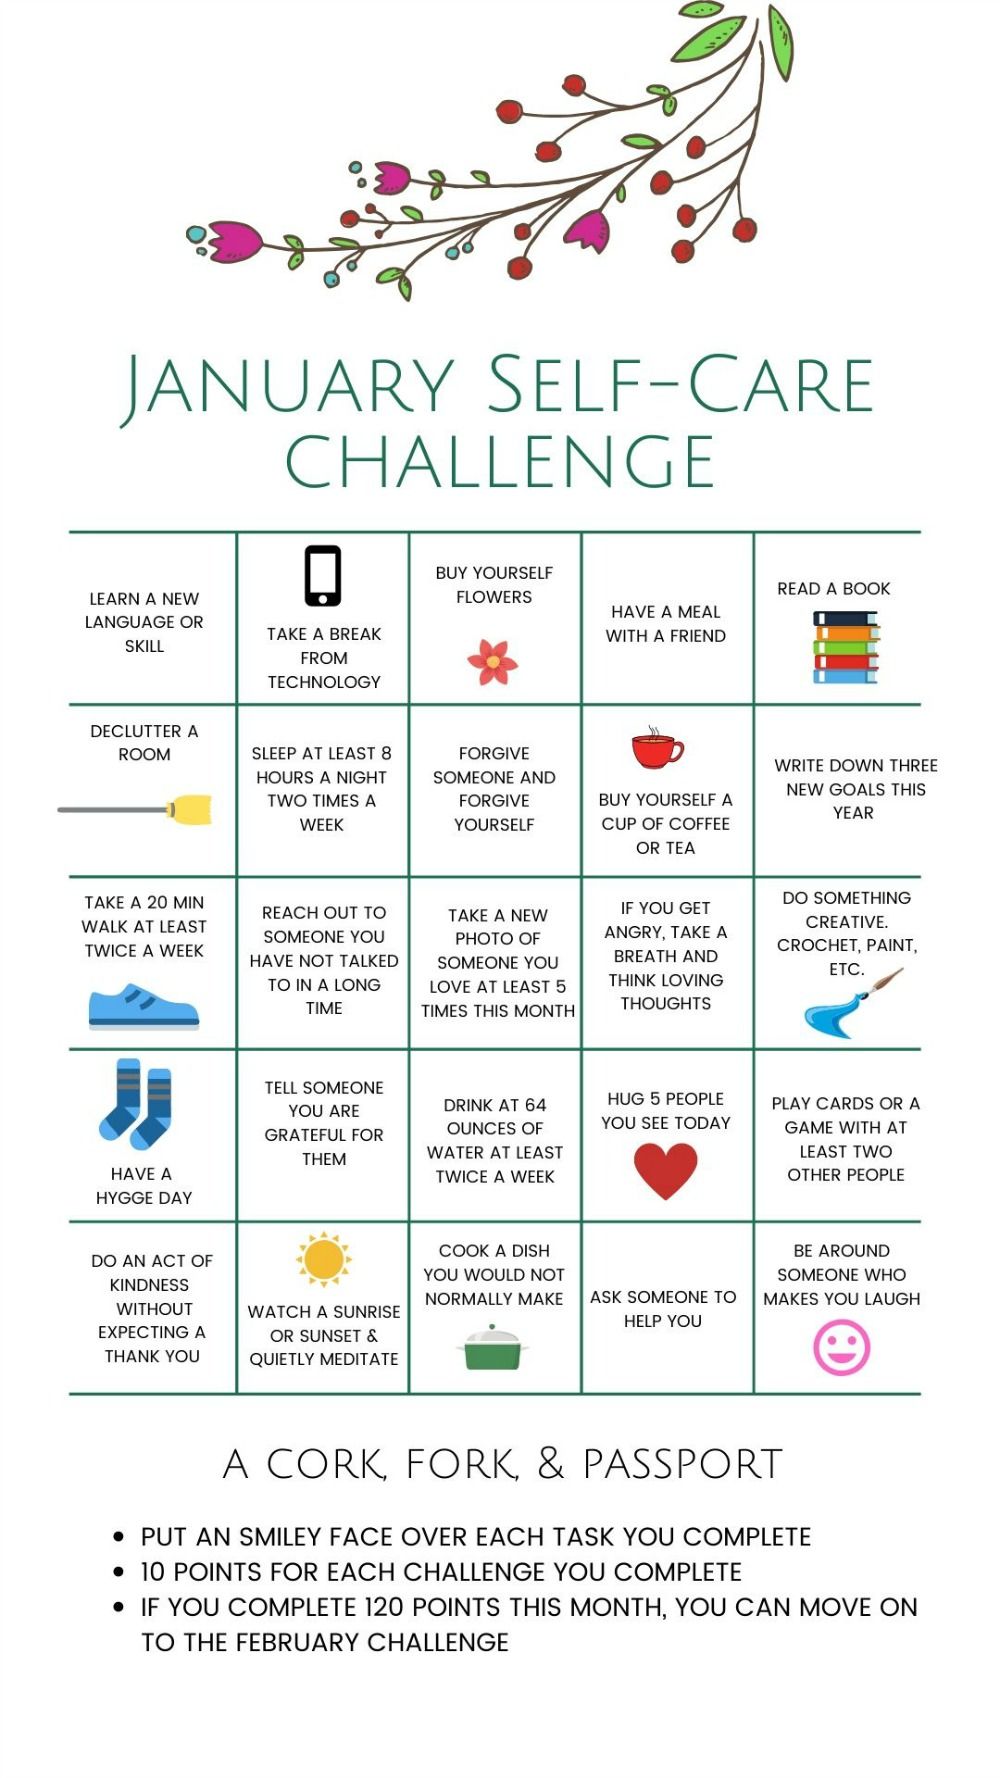 January Self-Care Challenge for Women